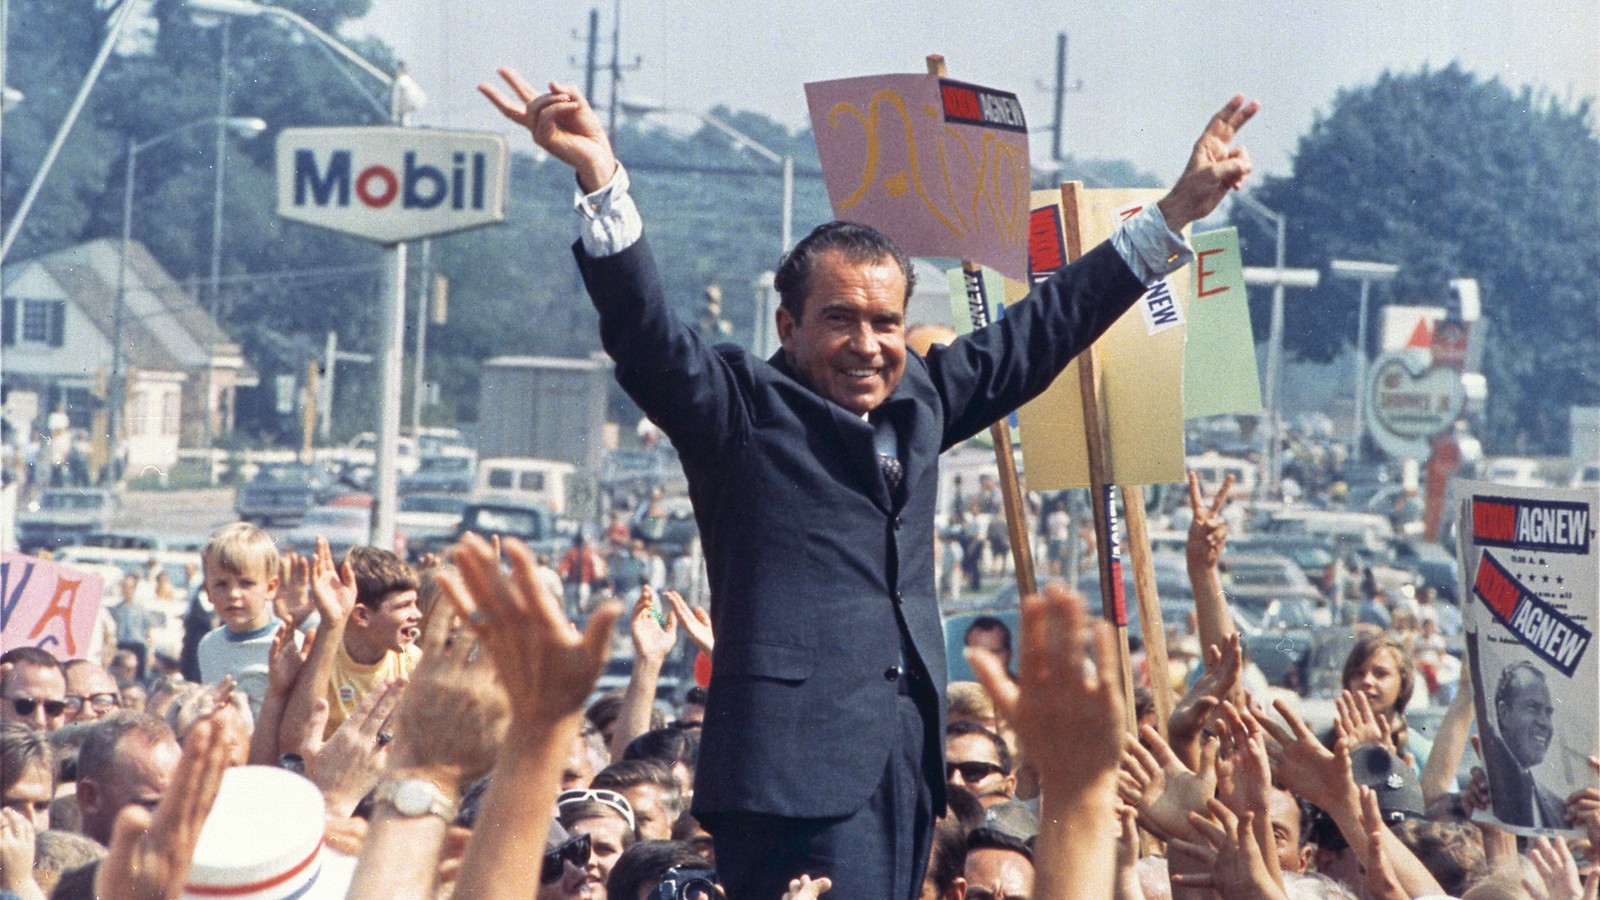 An Excerpt From Being Nixon: A Man Divided